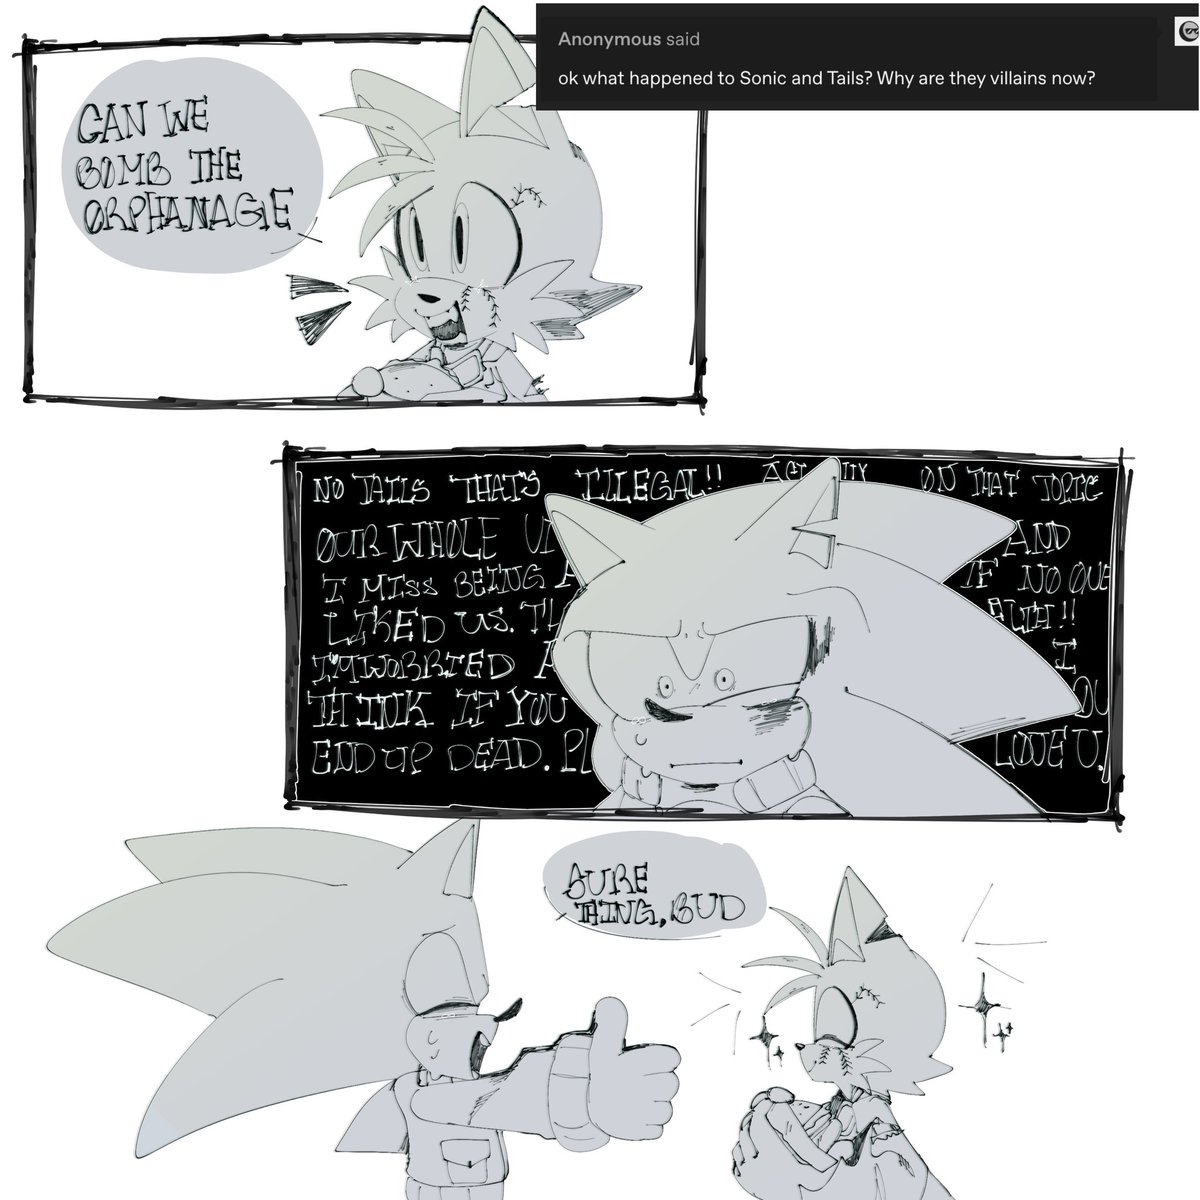 Saying no to Tails is hard 

#sonicfanart